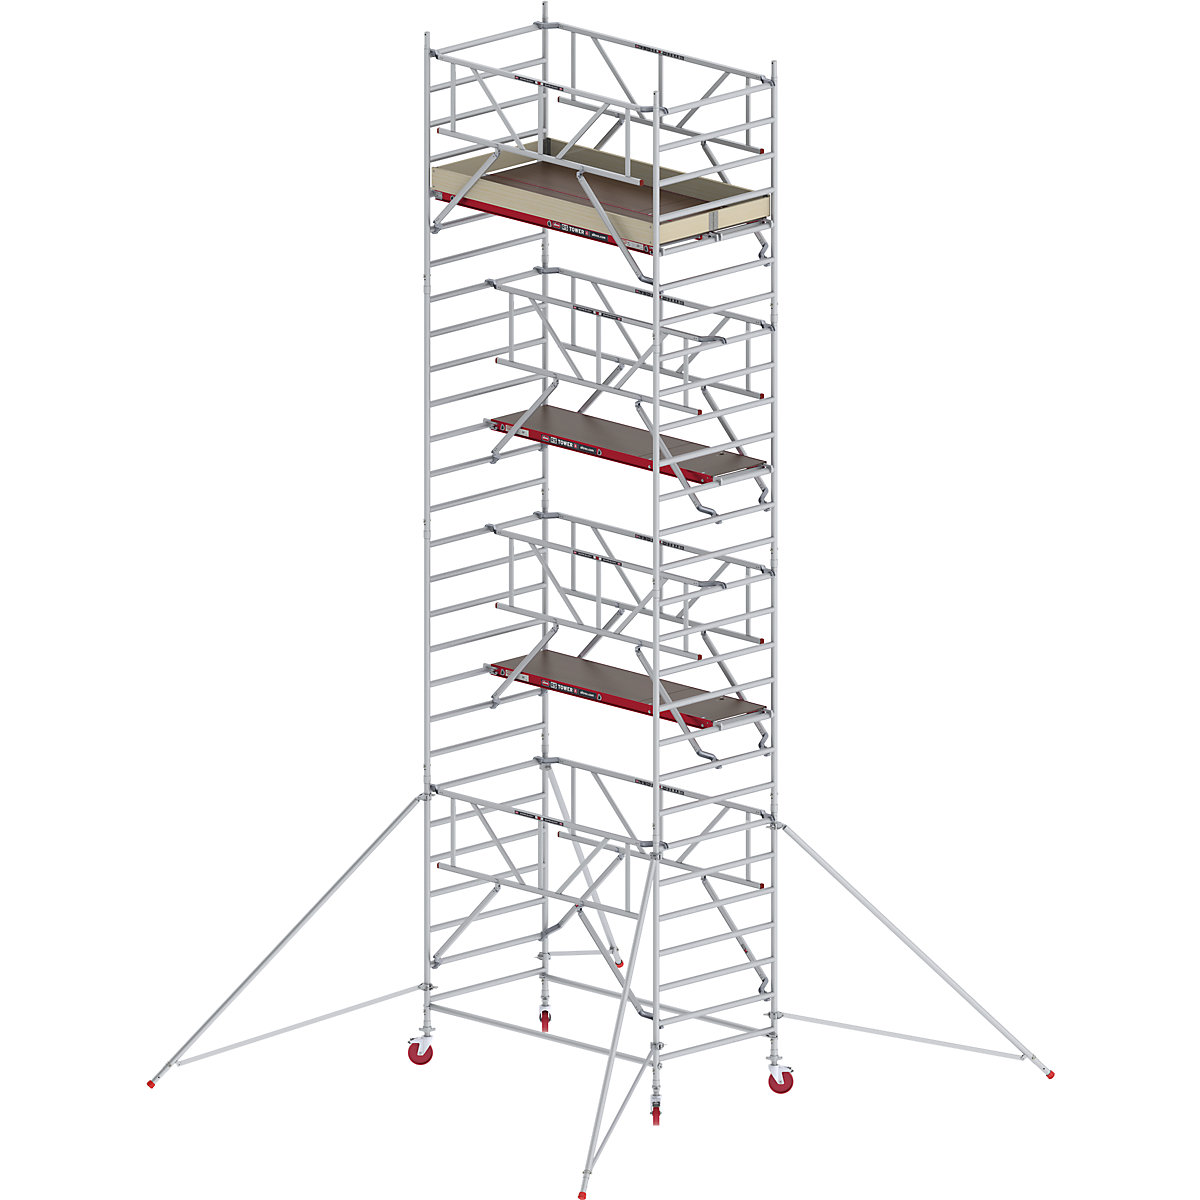 RS TOWER 42 wide mobile access tower with Safe-Quick® – Altrex, wooden platform, length 1.85 m, working height 9.20 m-11